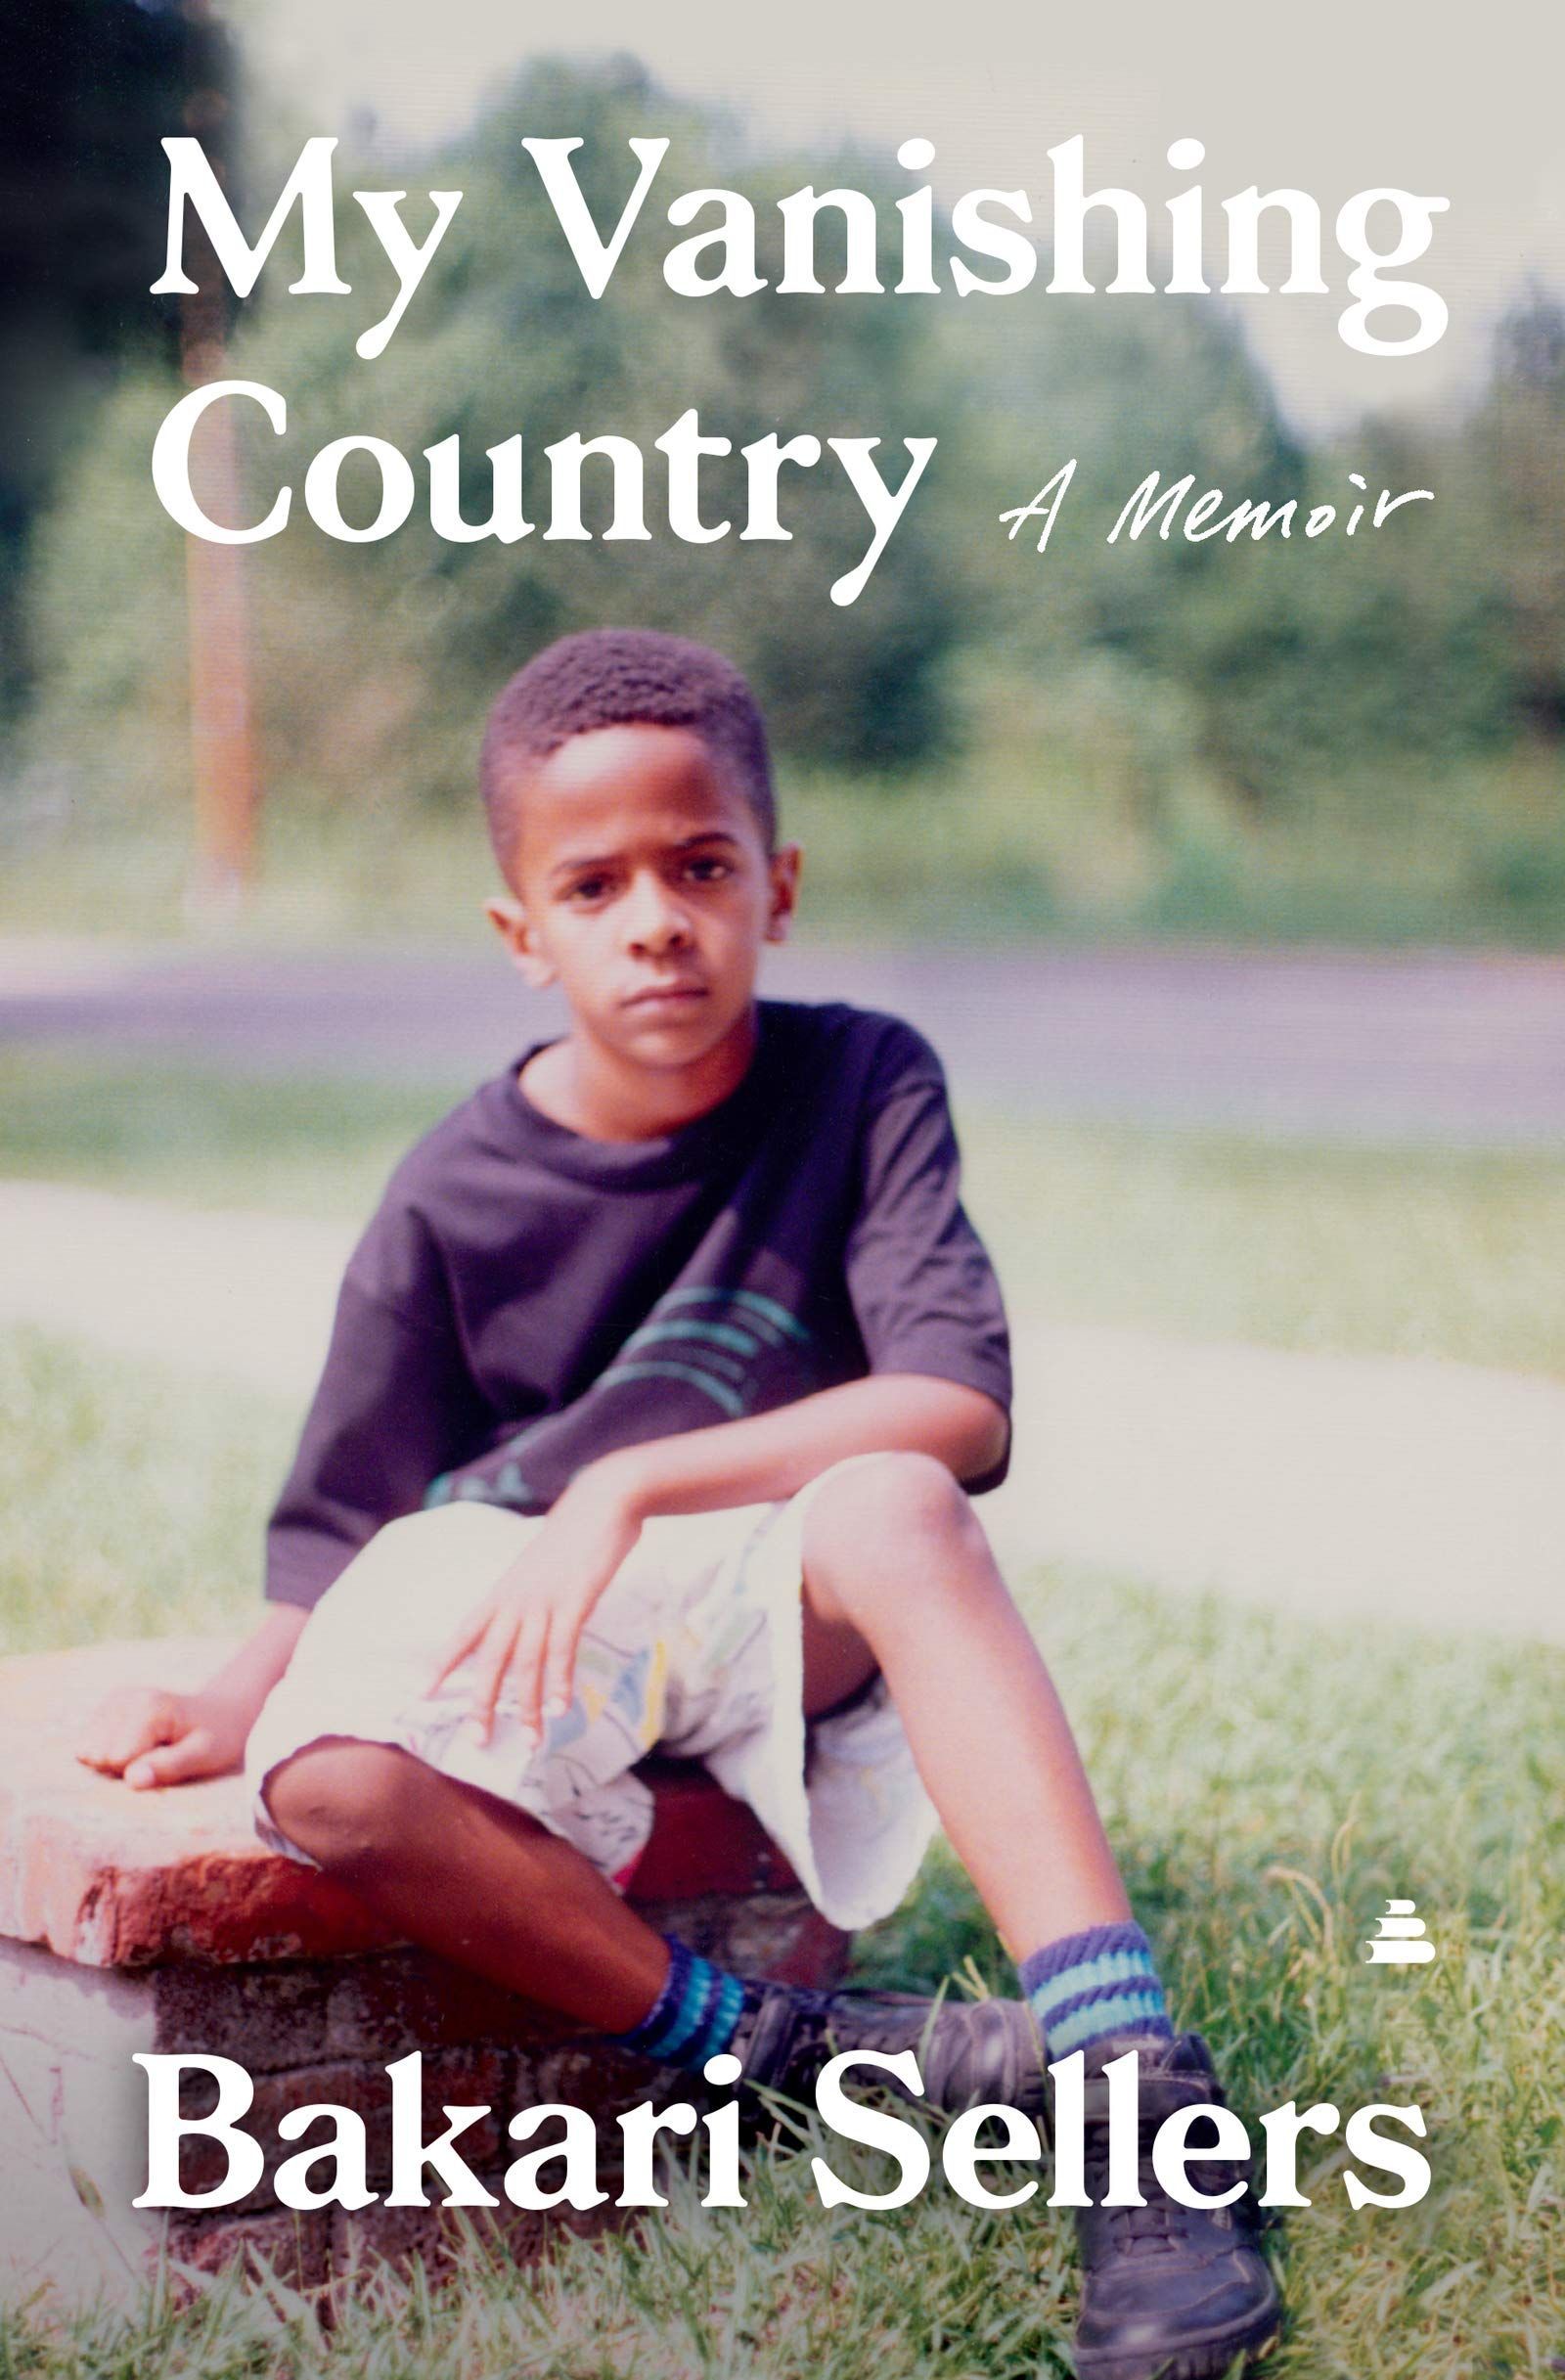 A Voice from America’s Black Belt: On Bakari Sellers’s “My Vanishing Country”